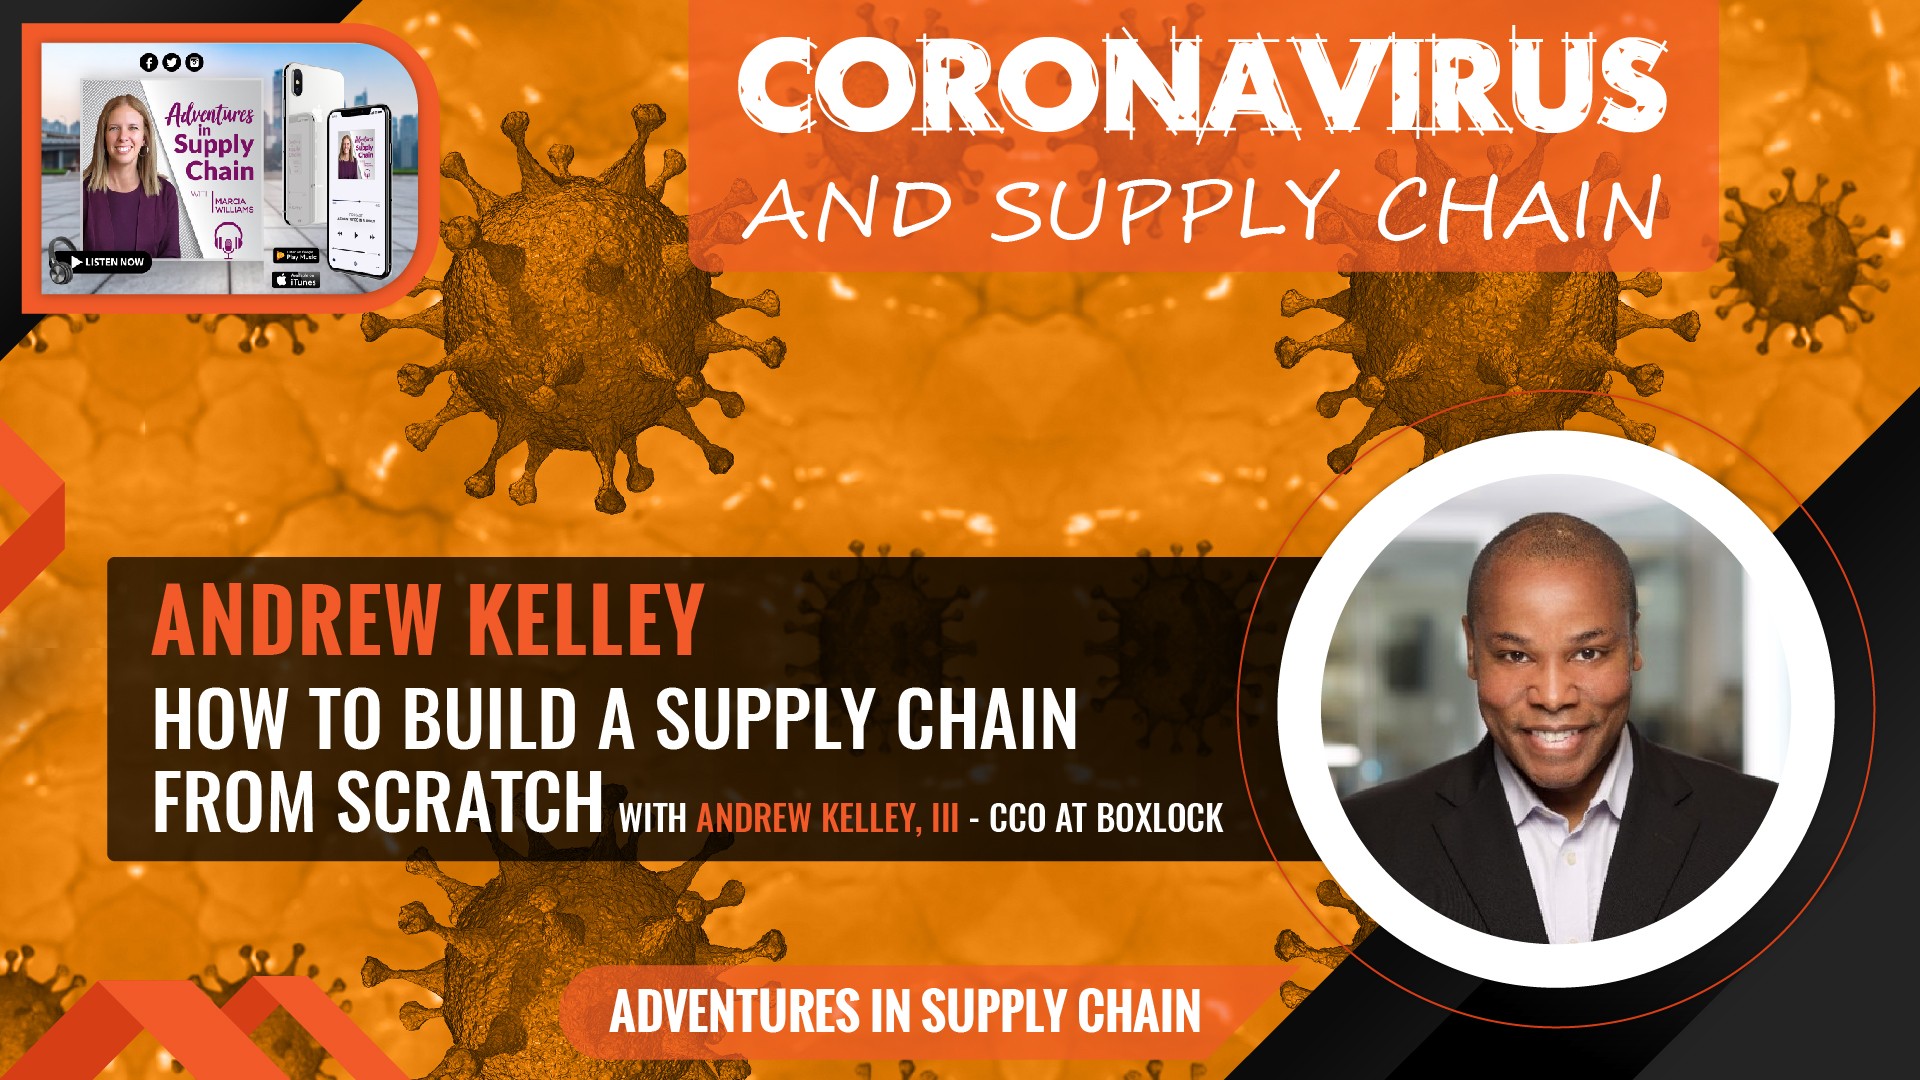 Coronavirus and Supply Chain – How to build a Supply Chain with Andrew Kelley, III